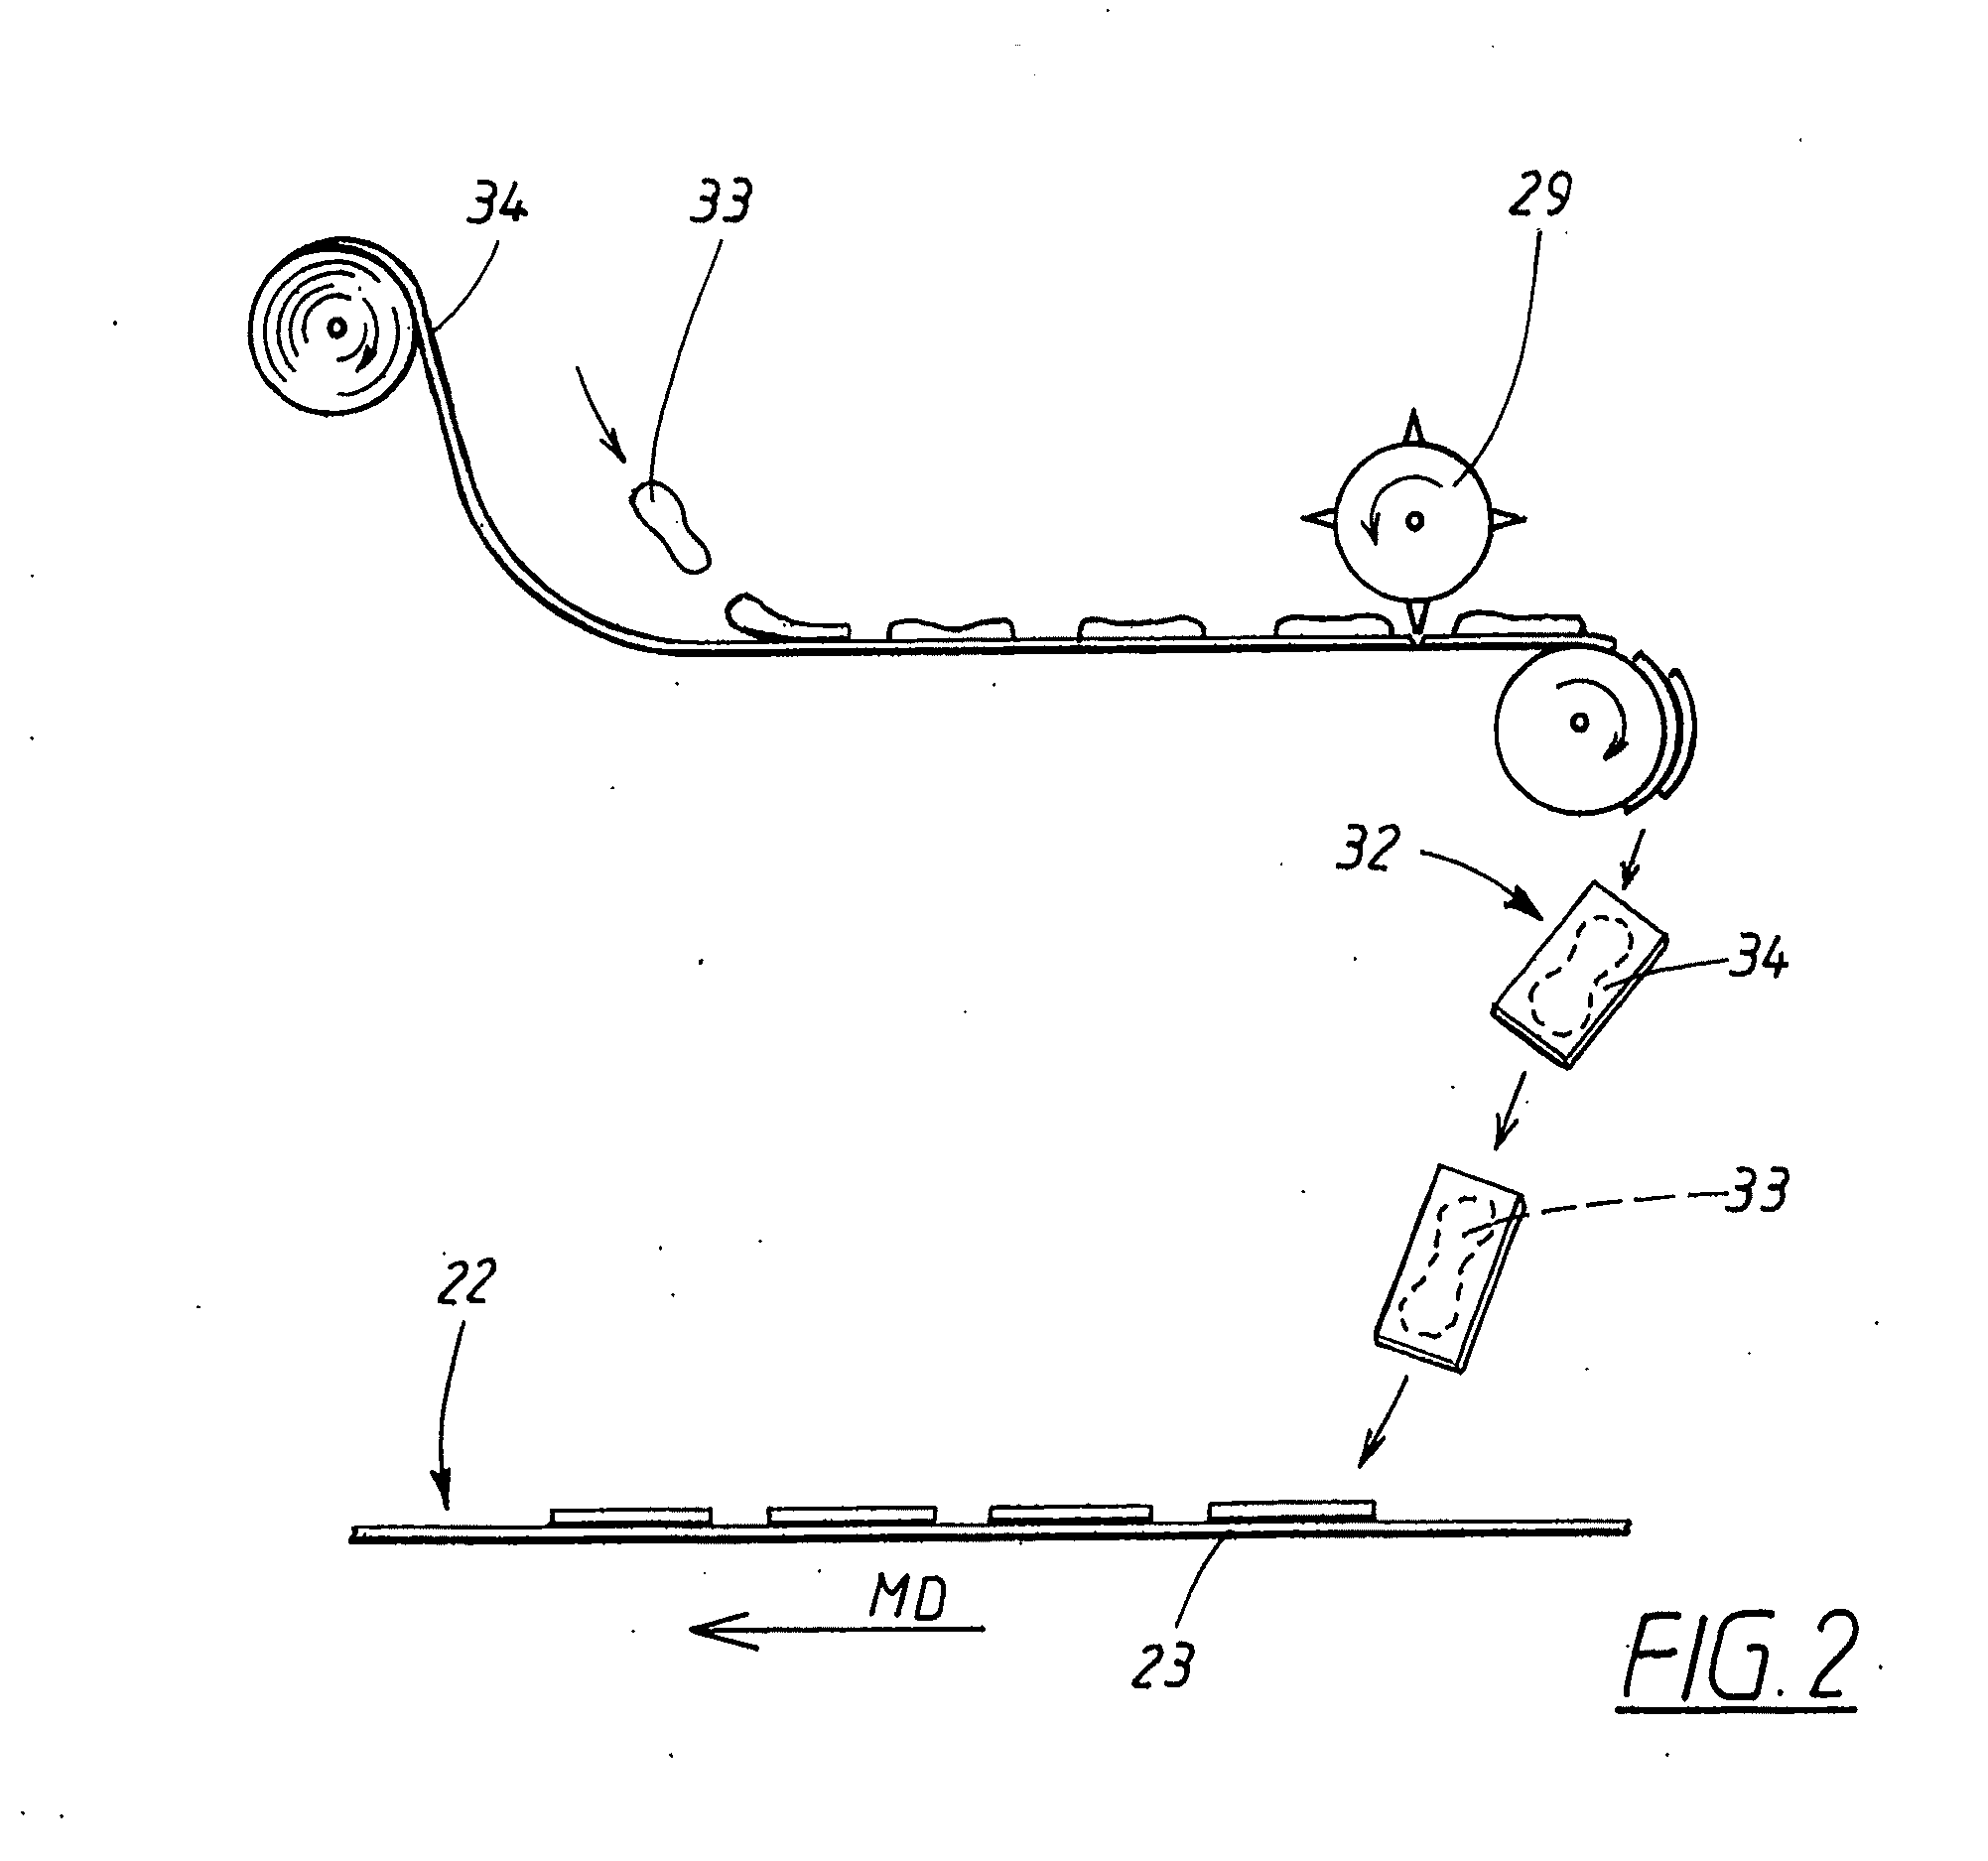 Method of producing an absorbent garment, and an absorbent garment produced according to the method